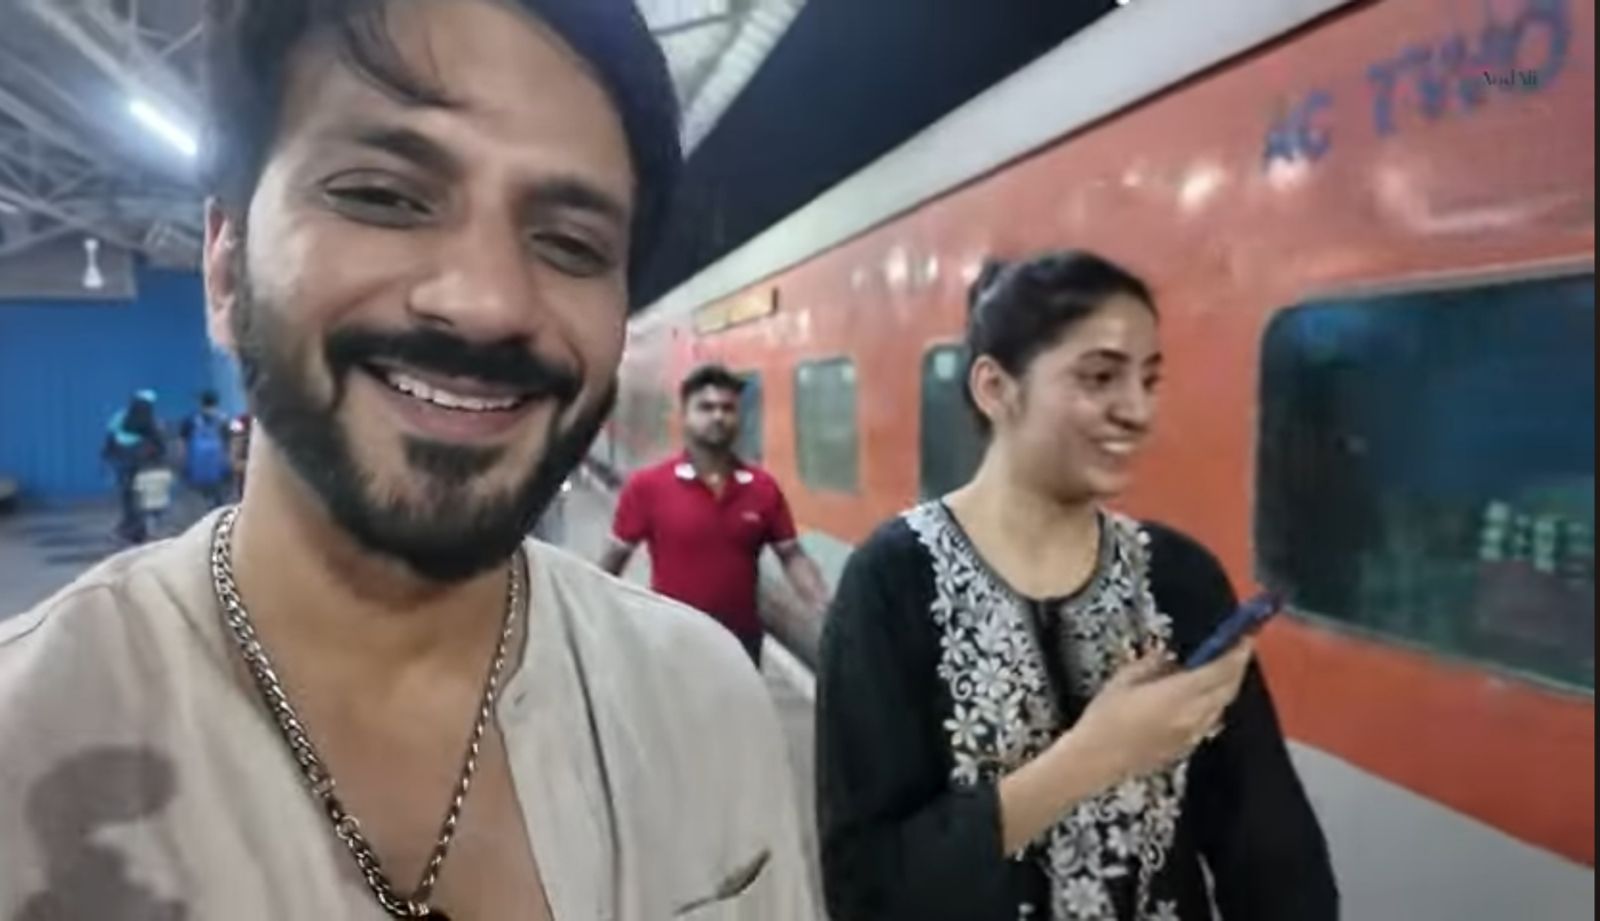 Actor Ali Merchant travels by train from Hyderabad to Mumbai with wife after 24 years to get their rescued dogs home, faces many challenges travelling in public transport